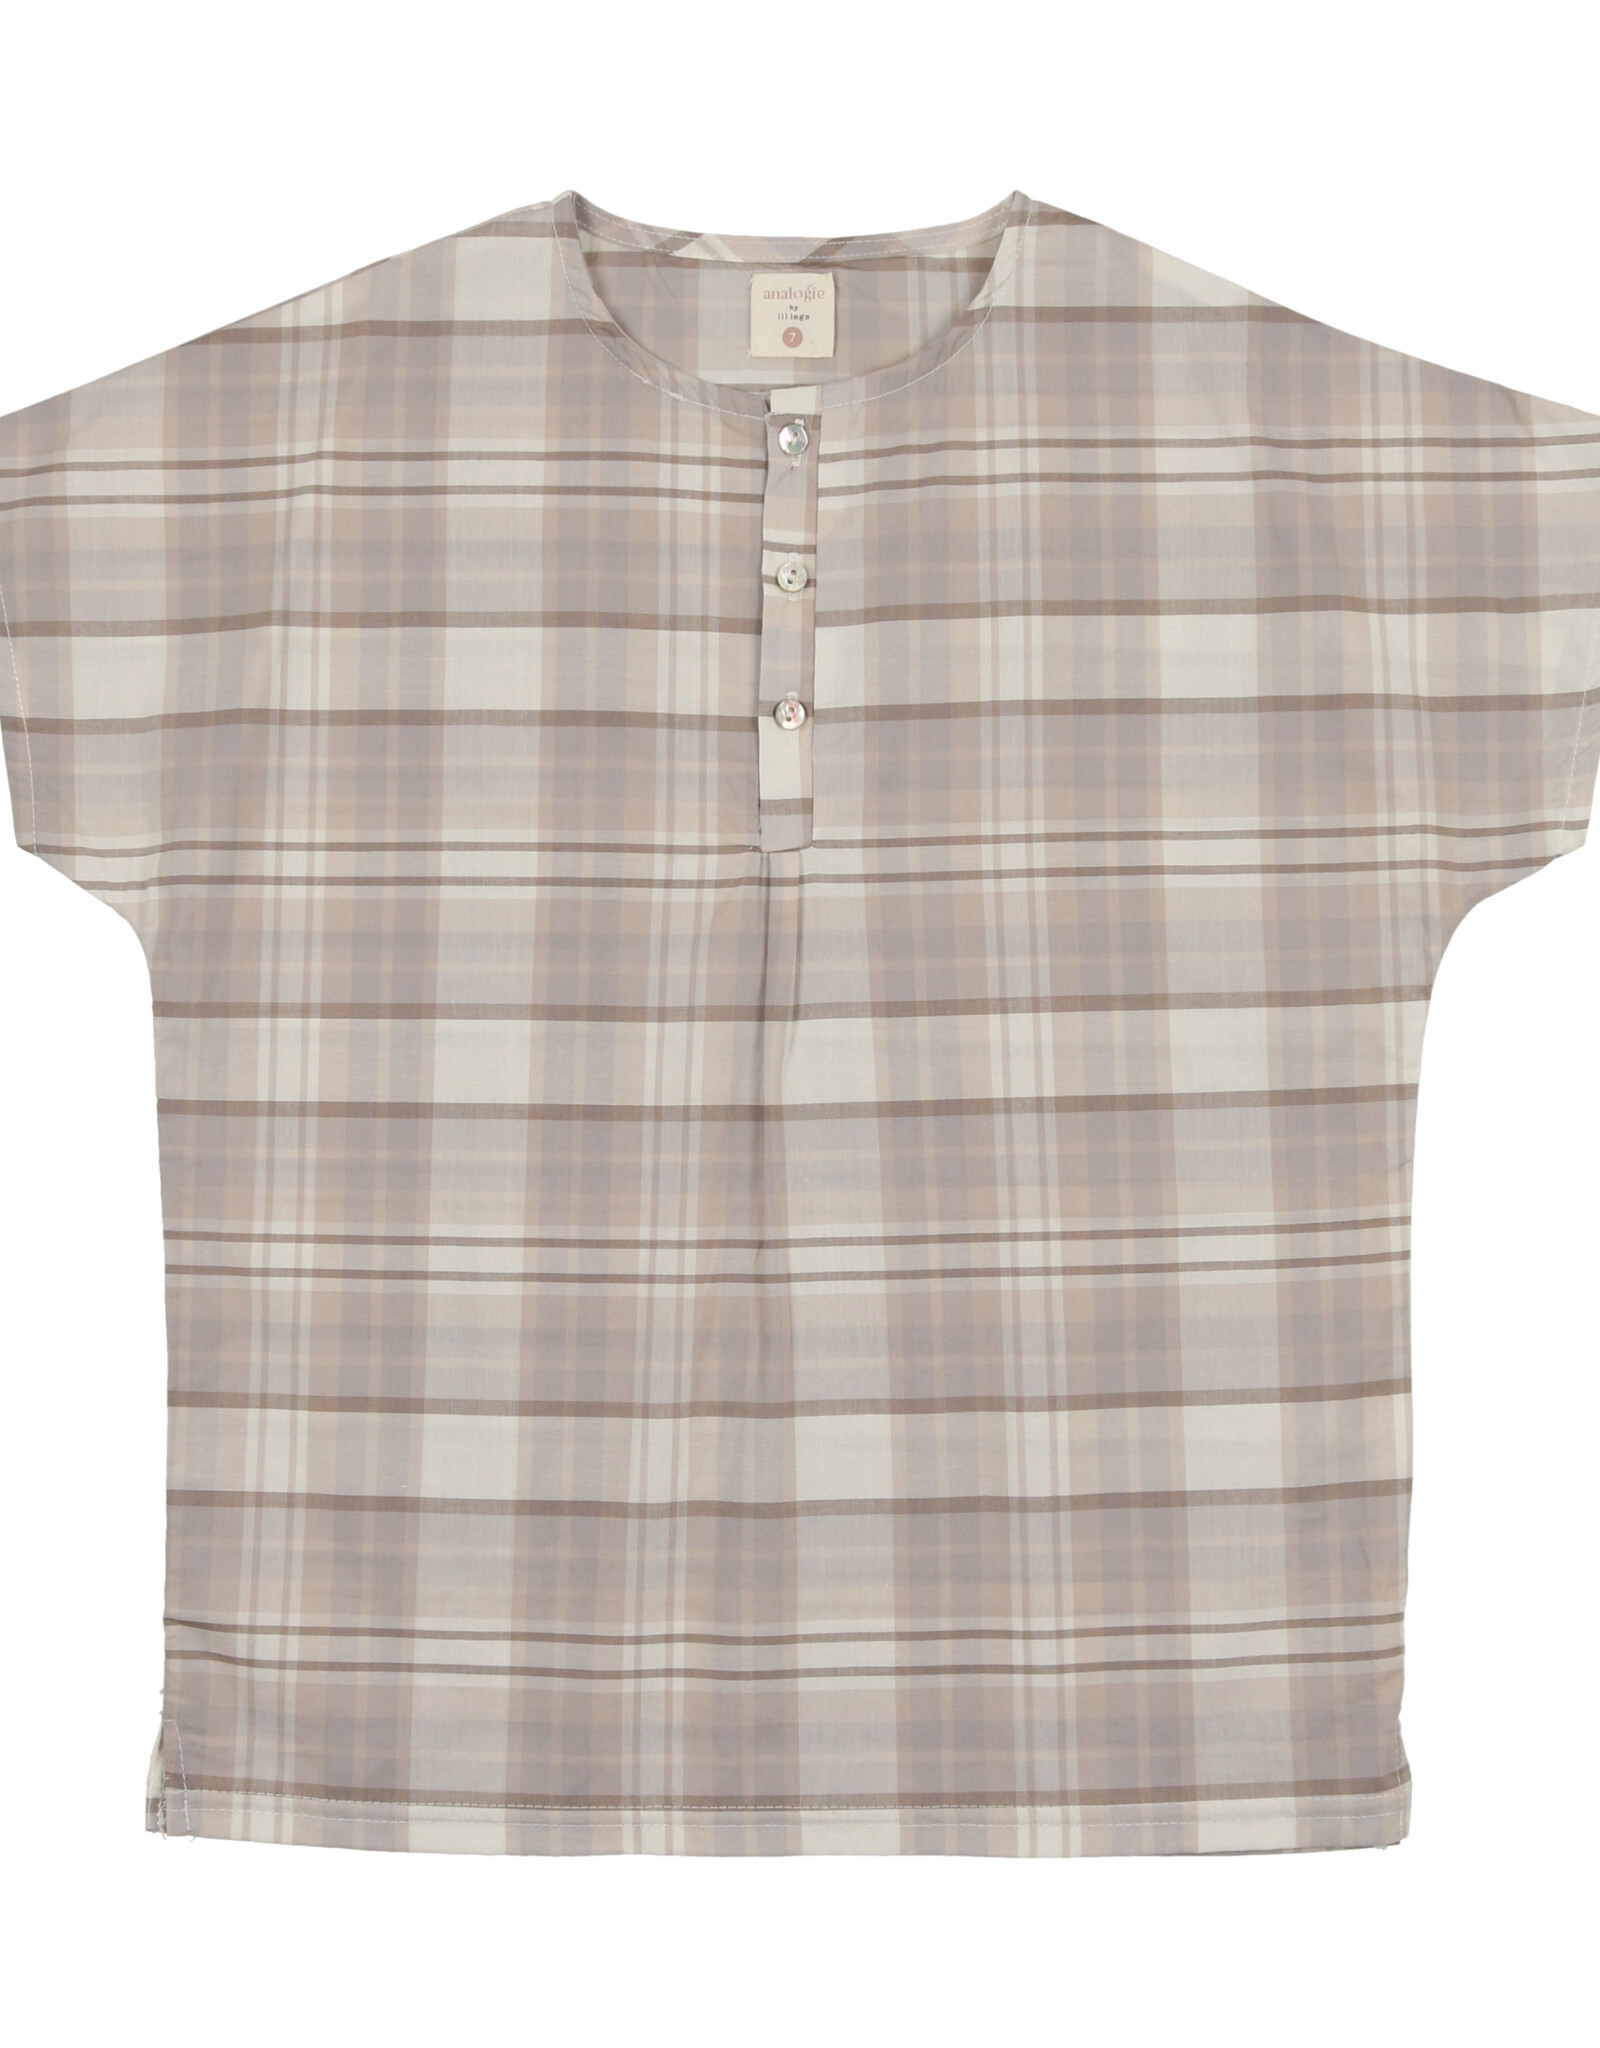 Analogie Pleated Button Shirt